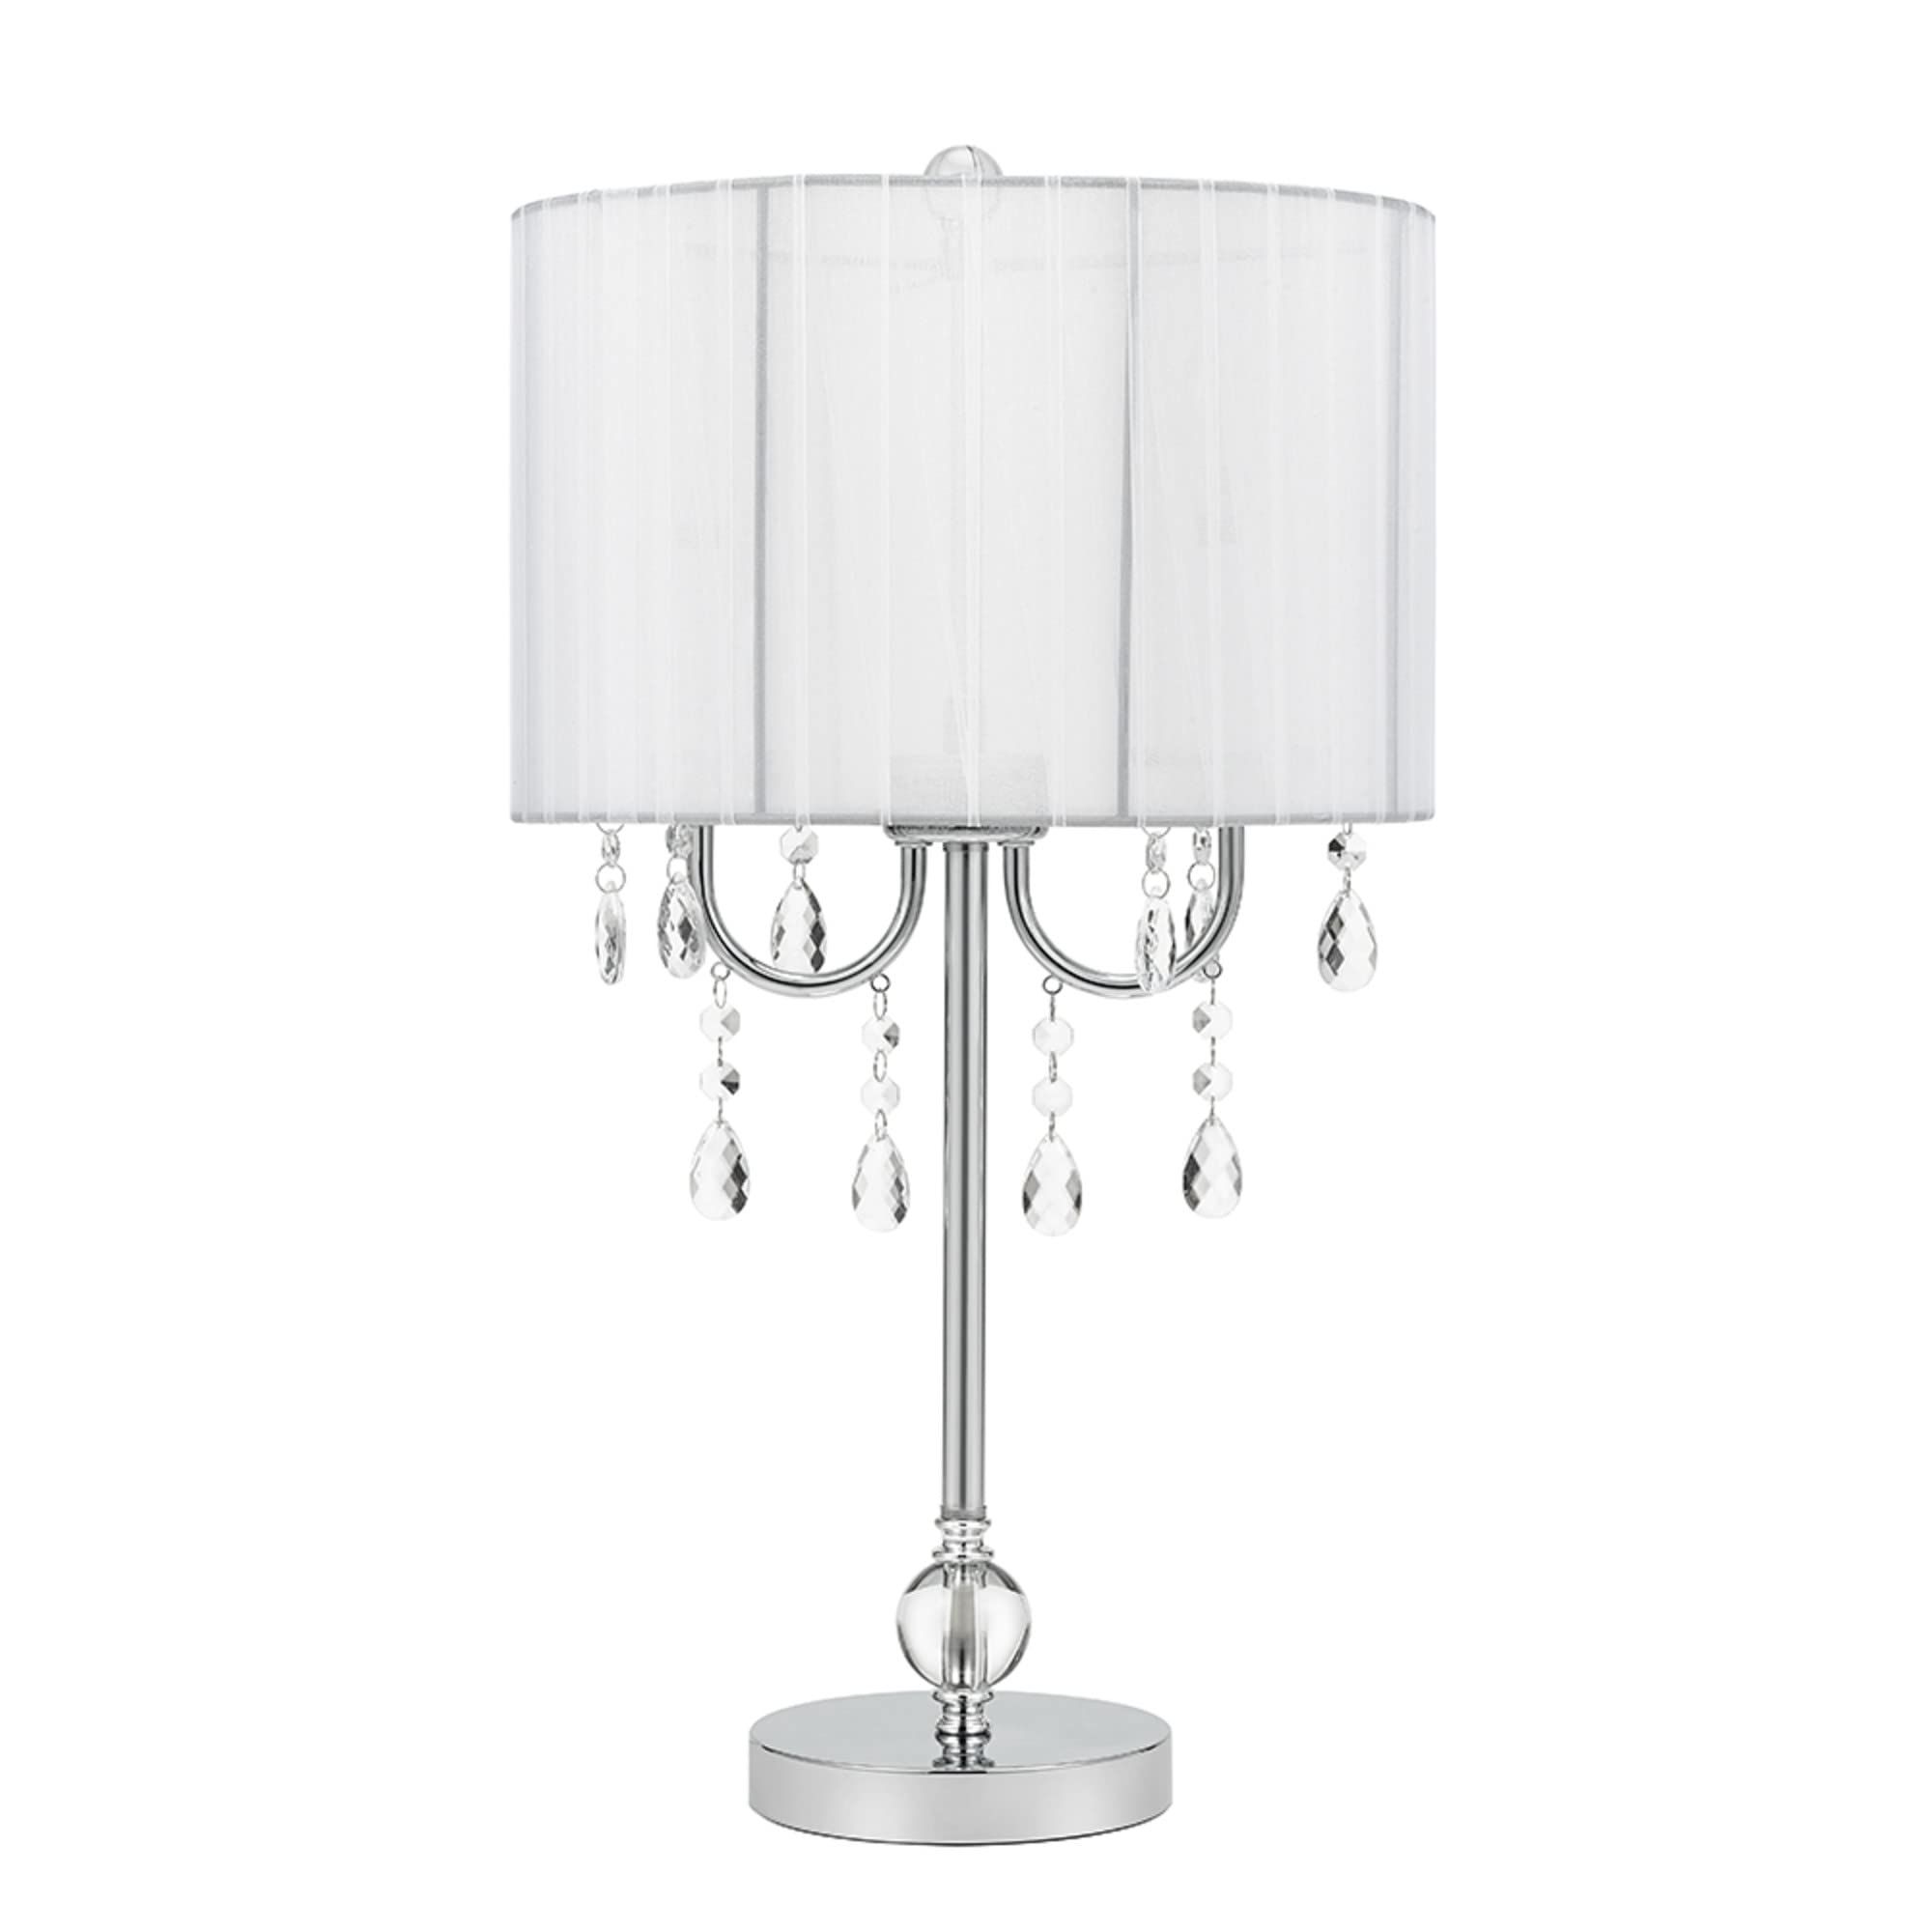 Most Recently Released Amazon: Catalina 19519 003 Glam Chandelier Table Lamp With Dazzling  Clear Beads & Organza Pleated Shade, 23 In, Chrome Pertaining To Crystal Bead Chandelier Standing Lamps (View 9 of 15)